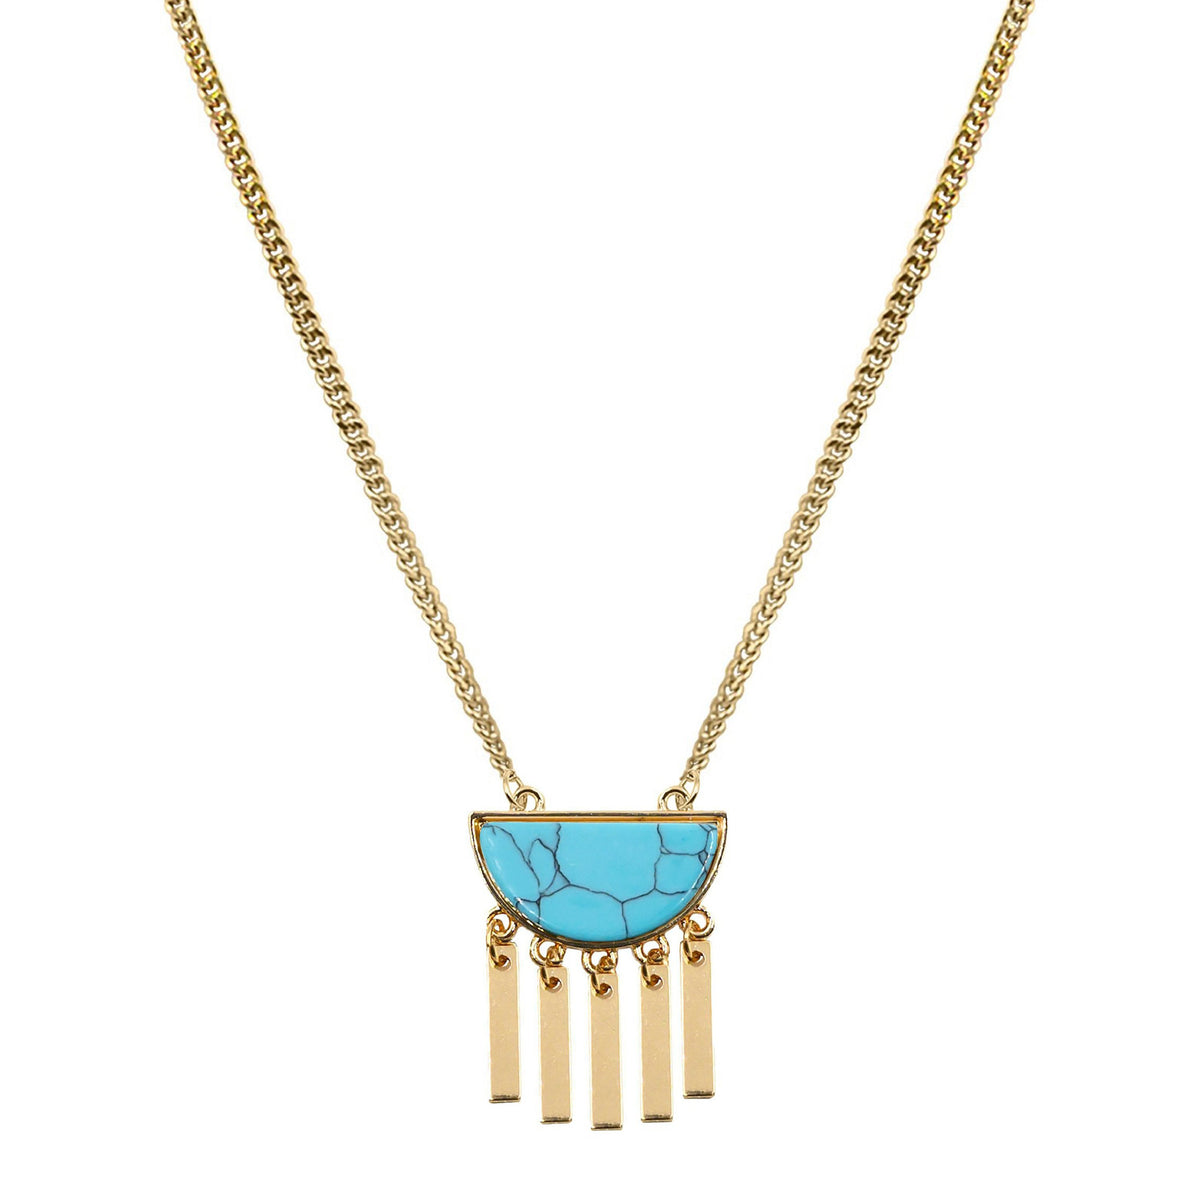 Bianca Collection - Turquoise Necklace fine designer jewelry for men and women